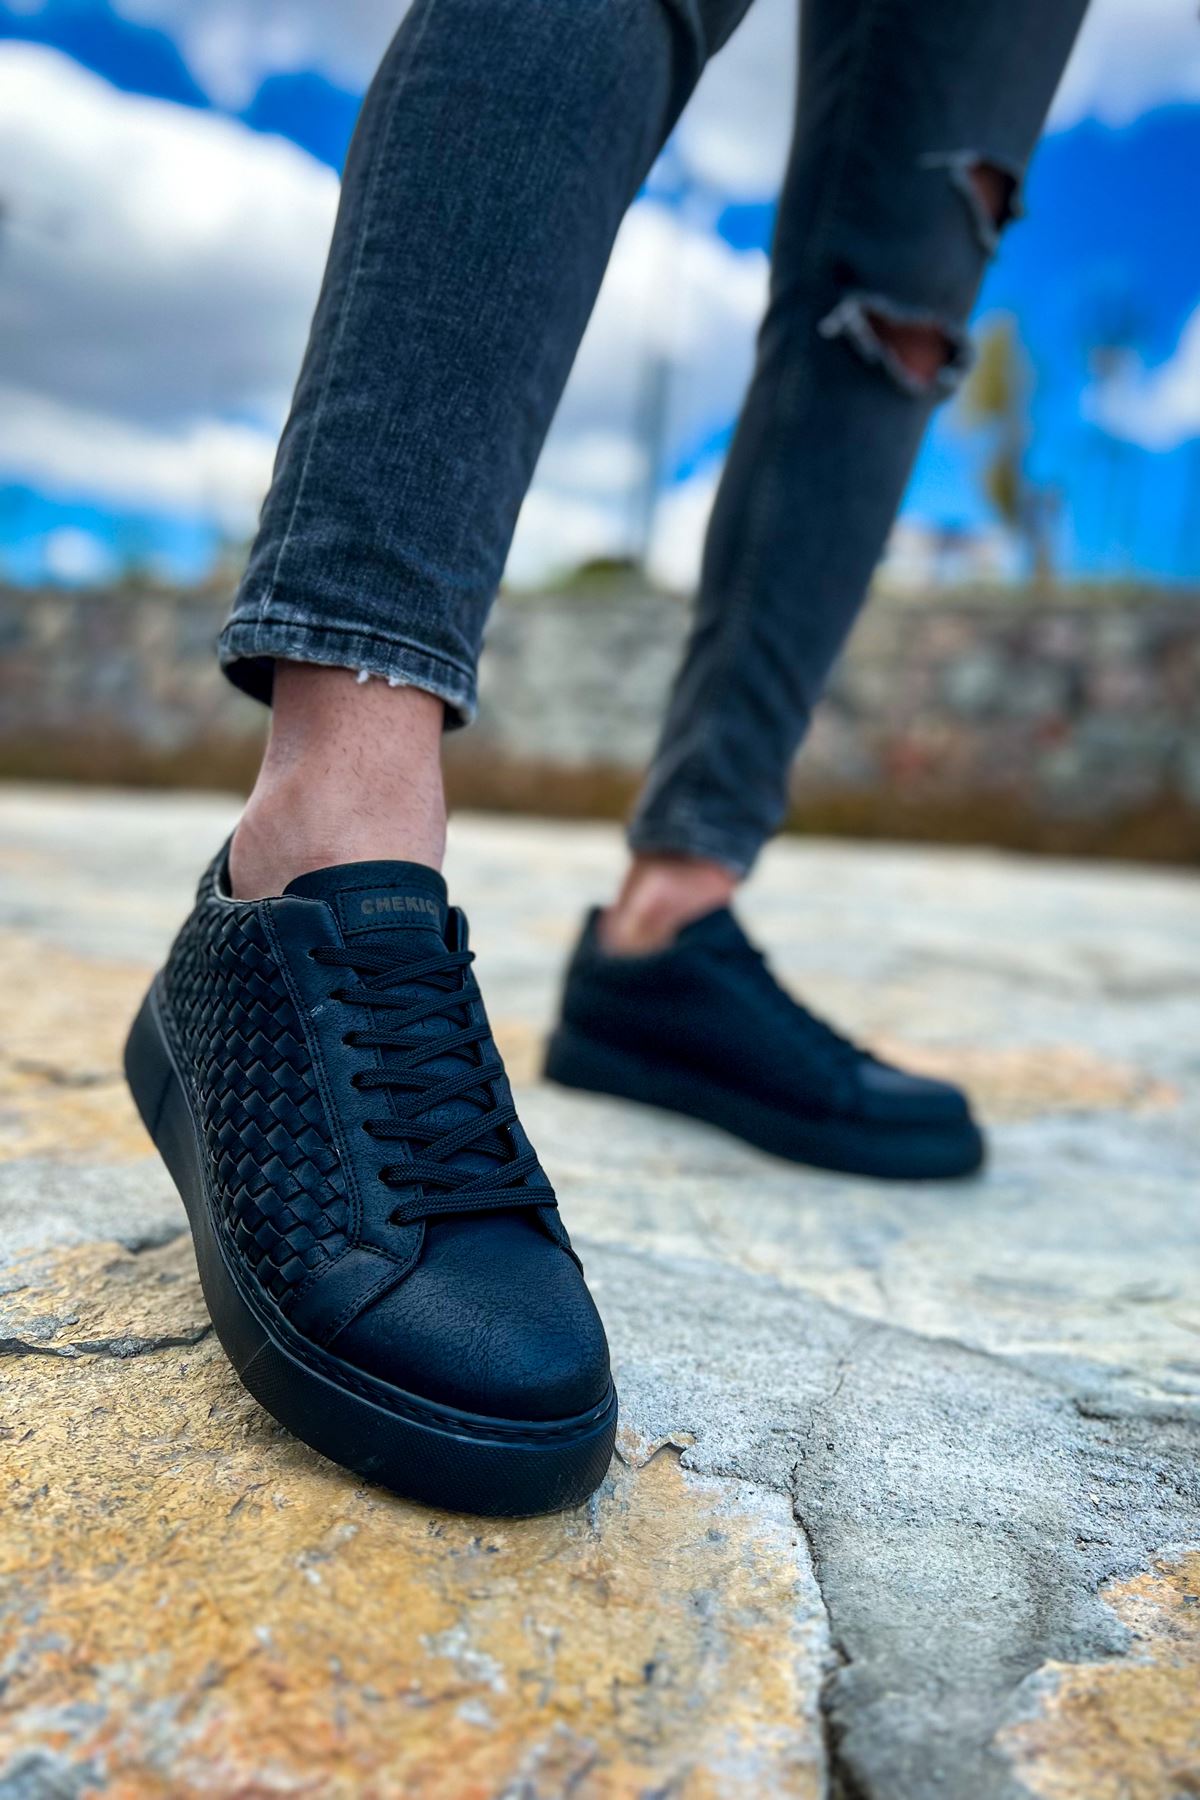 CH203 OST Maglieria Men's Sneakers Shoes BLACK - STREETMODE ™